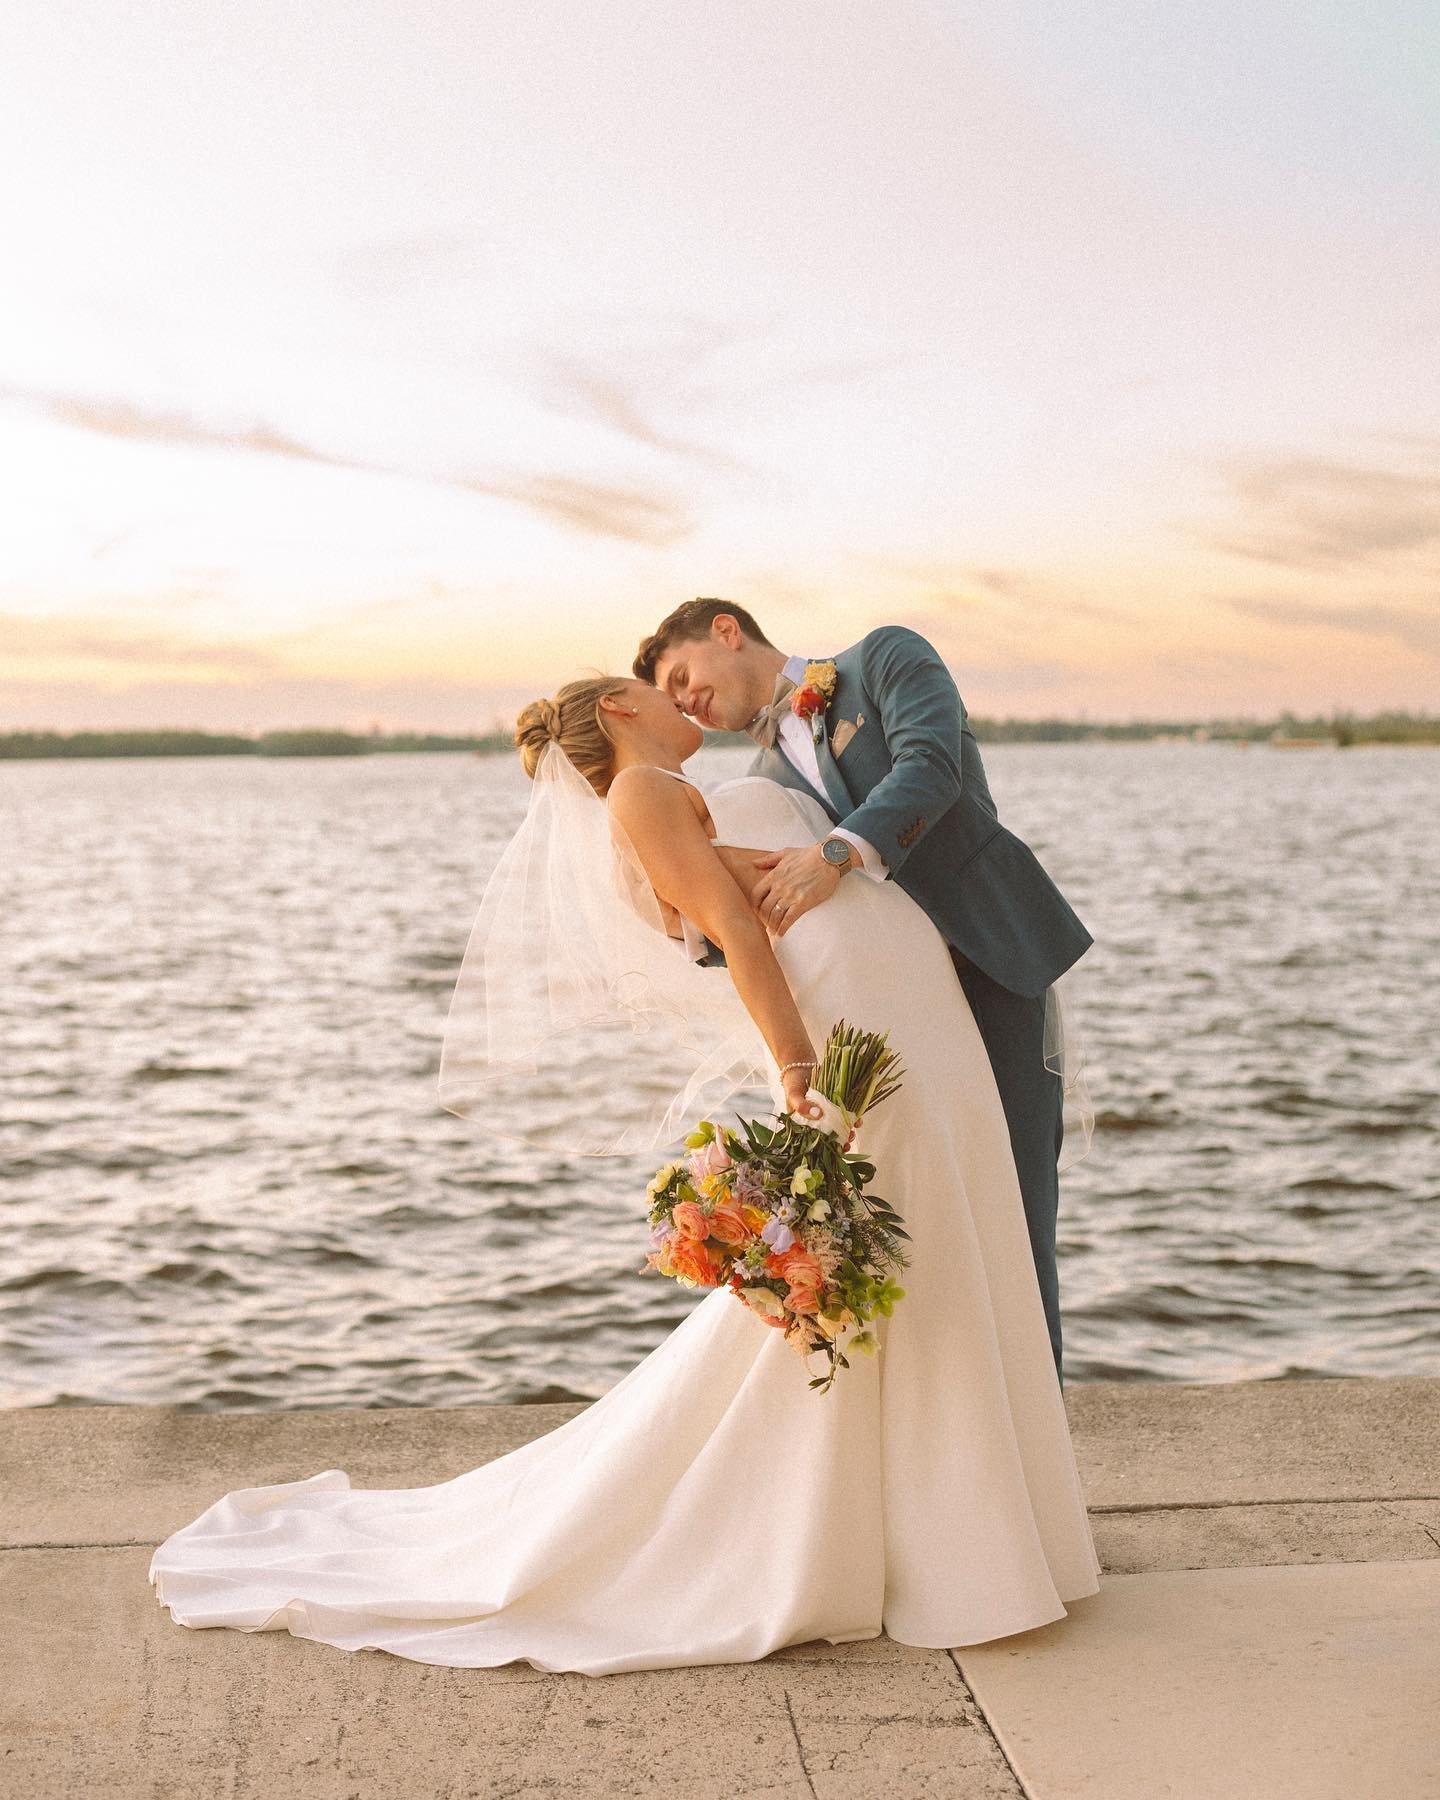 Liz and Tyler's carefree ceremony in Fort Myers, Florida was as picture perfect as you could imagine! Sun kissed skin, a golden hour glow, and a punchy, poppy floral palette of tulips, sweet peas, roses, ranunculus, and a splash of anemone, harmonizi